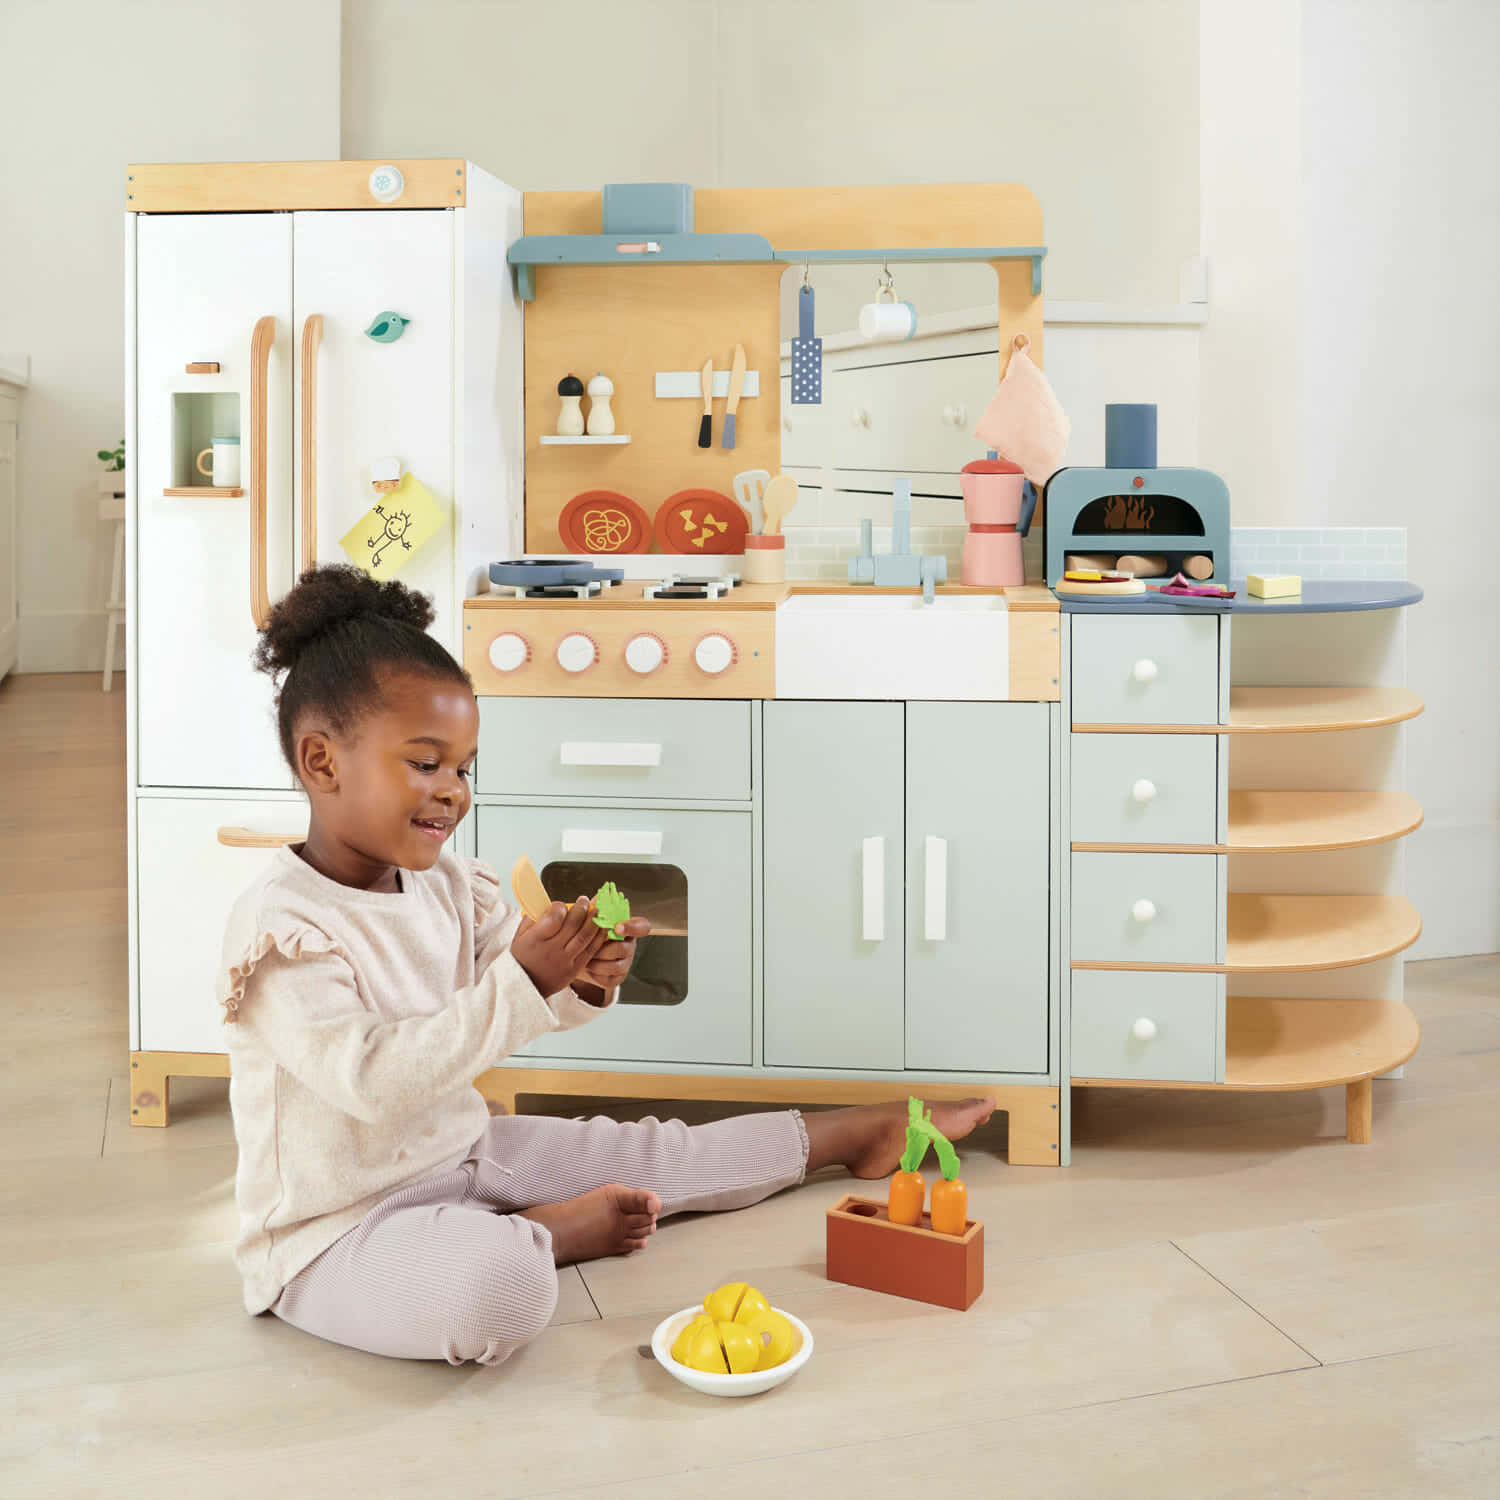 A Girl Playing With A Wooden Kitchen Set